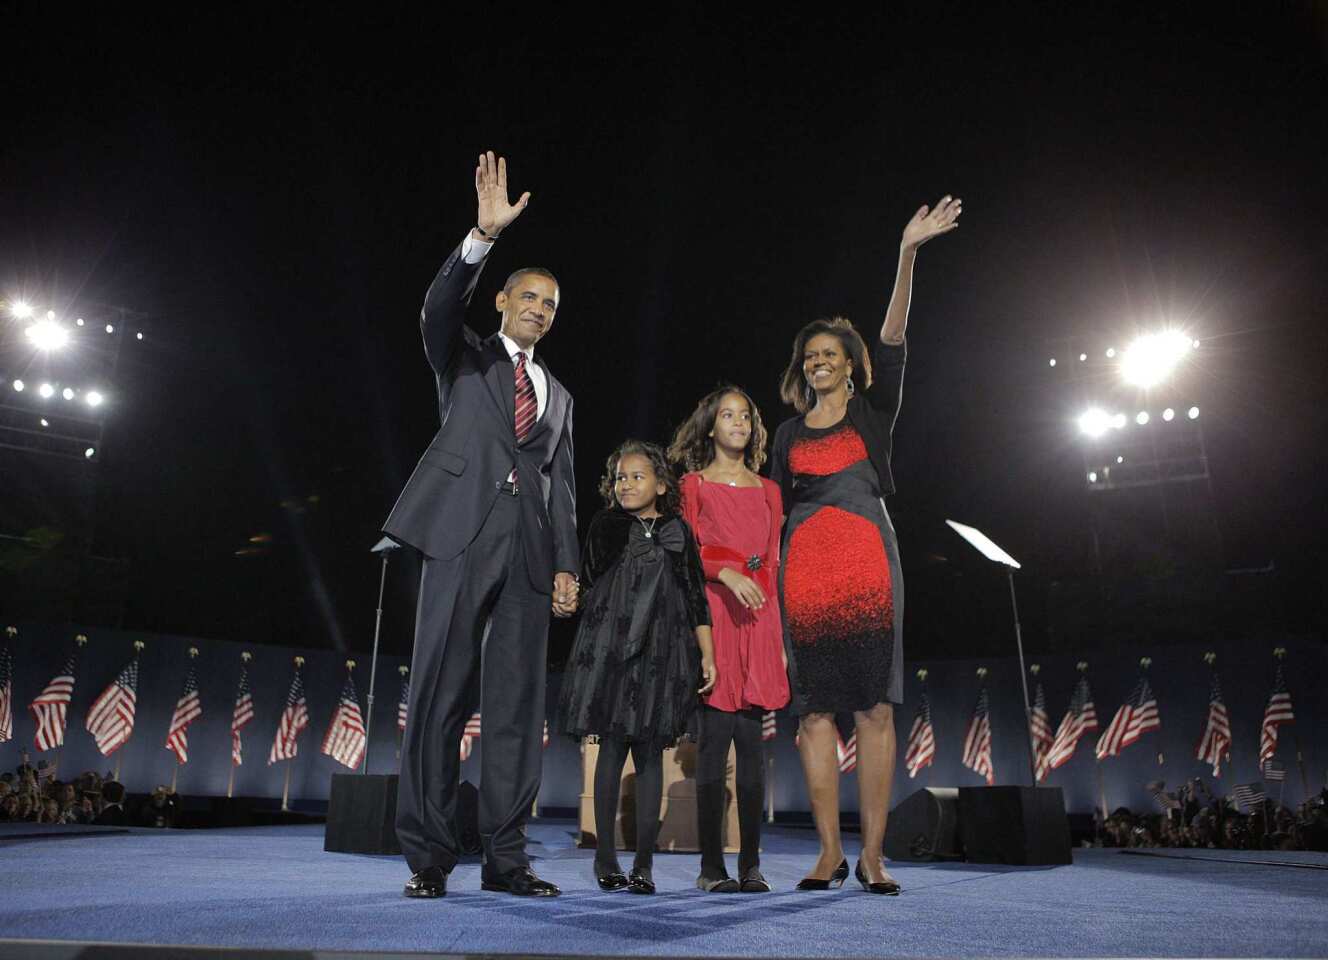 Unforgettable on TV: The Obama family on election night